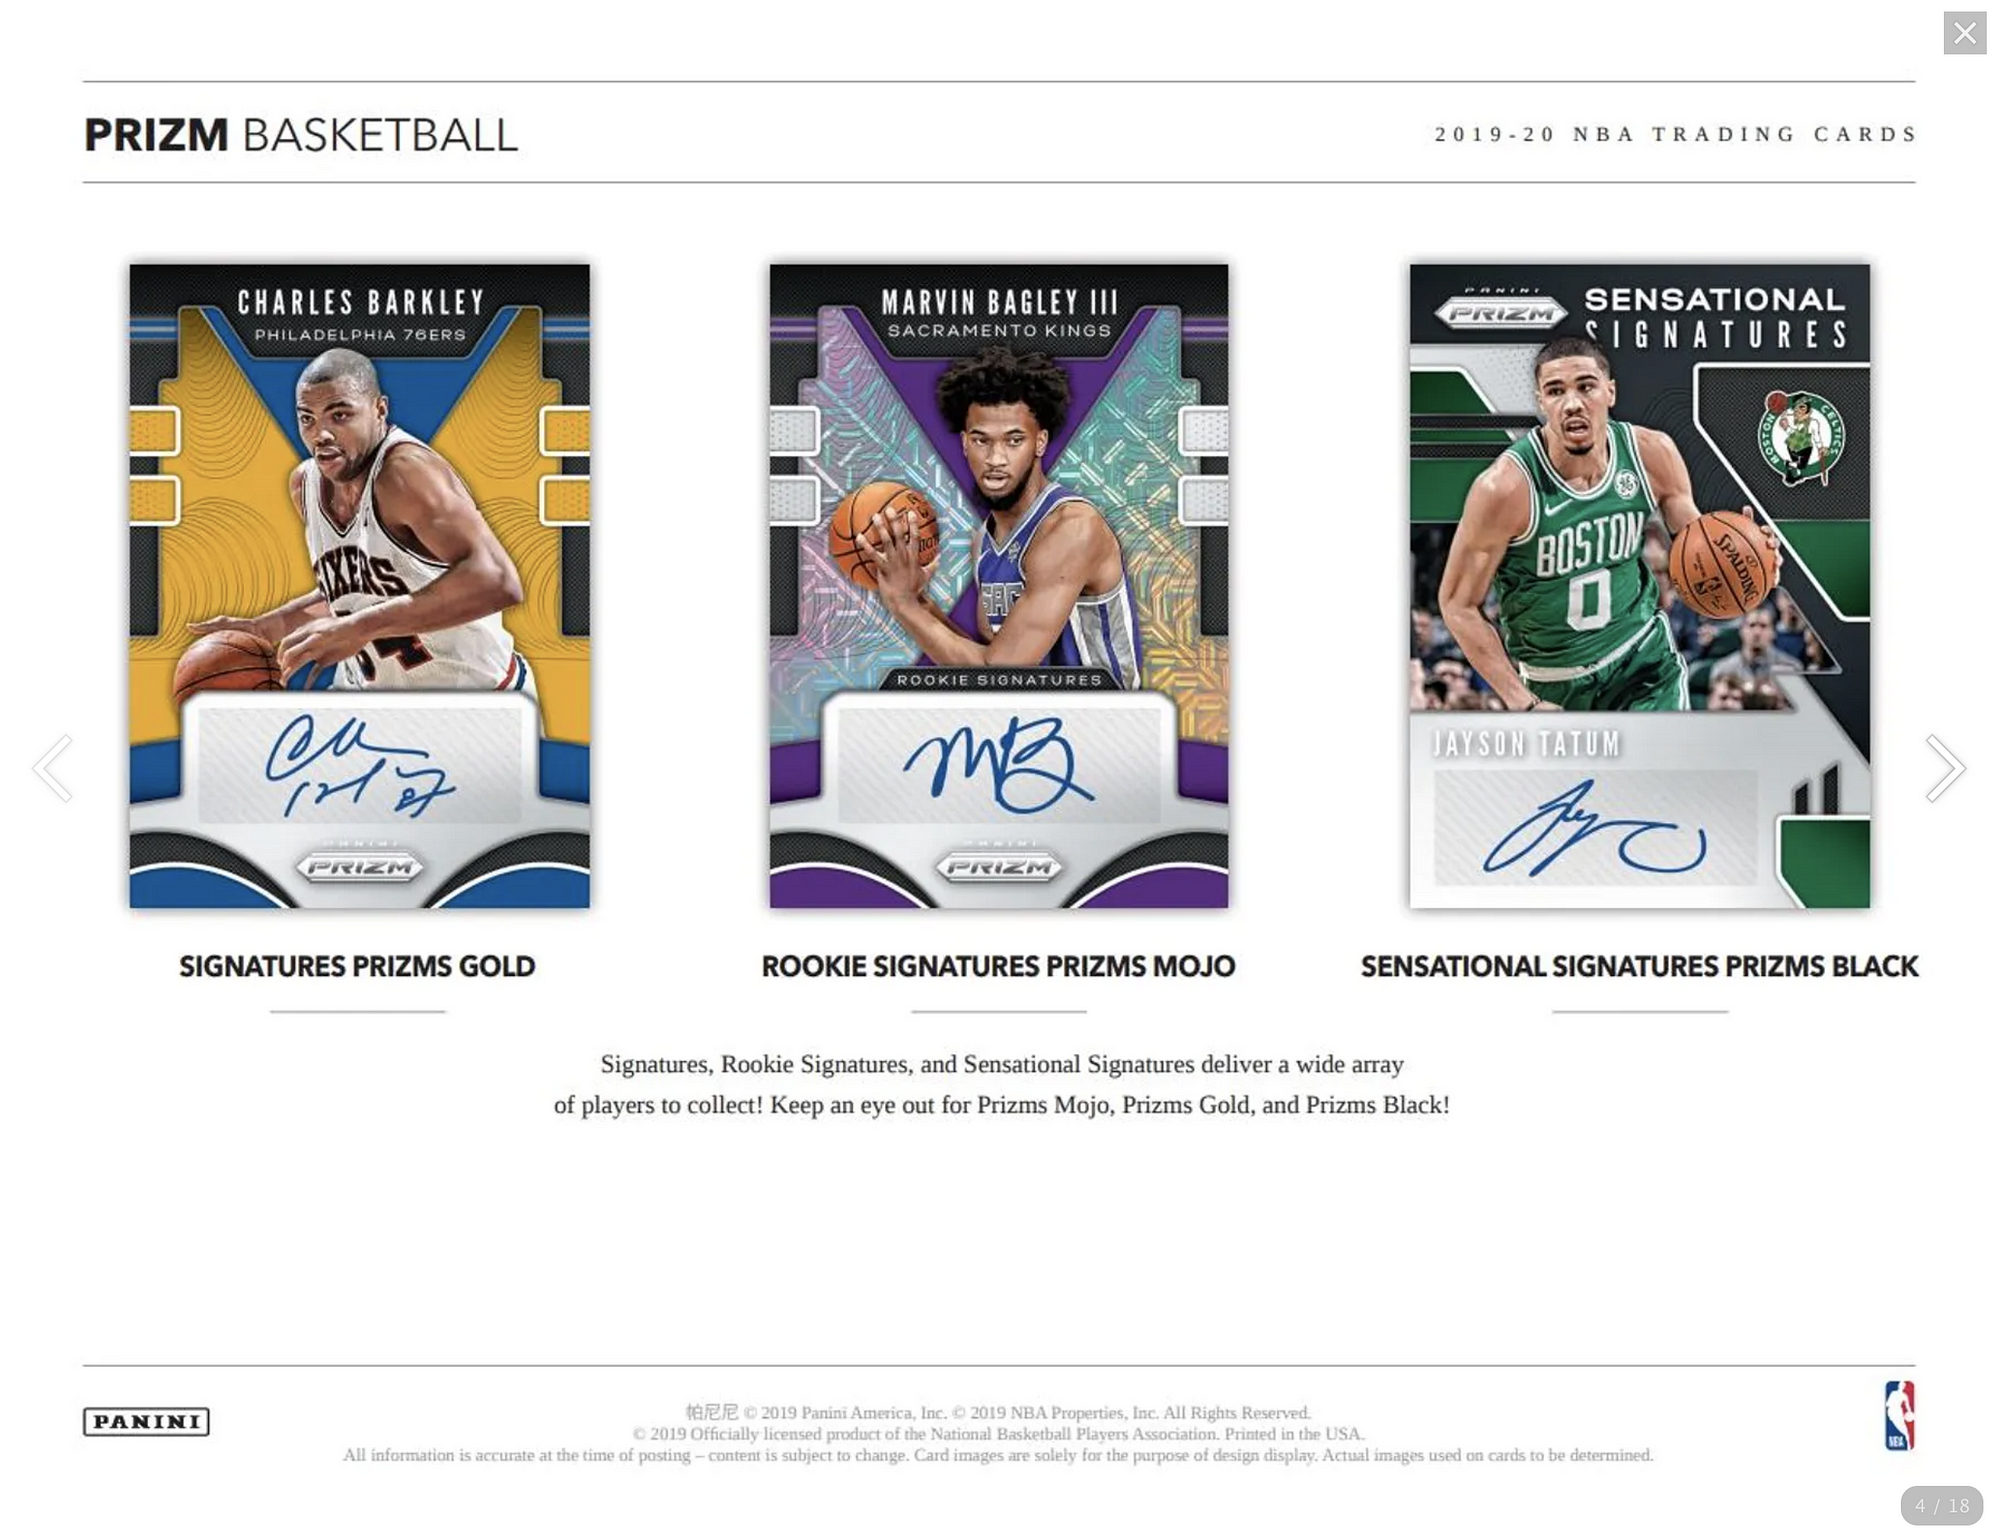 2023/24 Hit Parade Autographed Basketball Jersey Series 1 Hobby 10